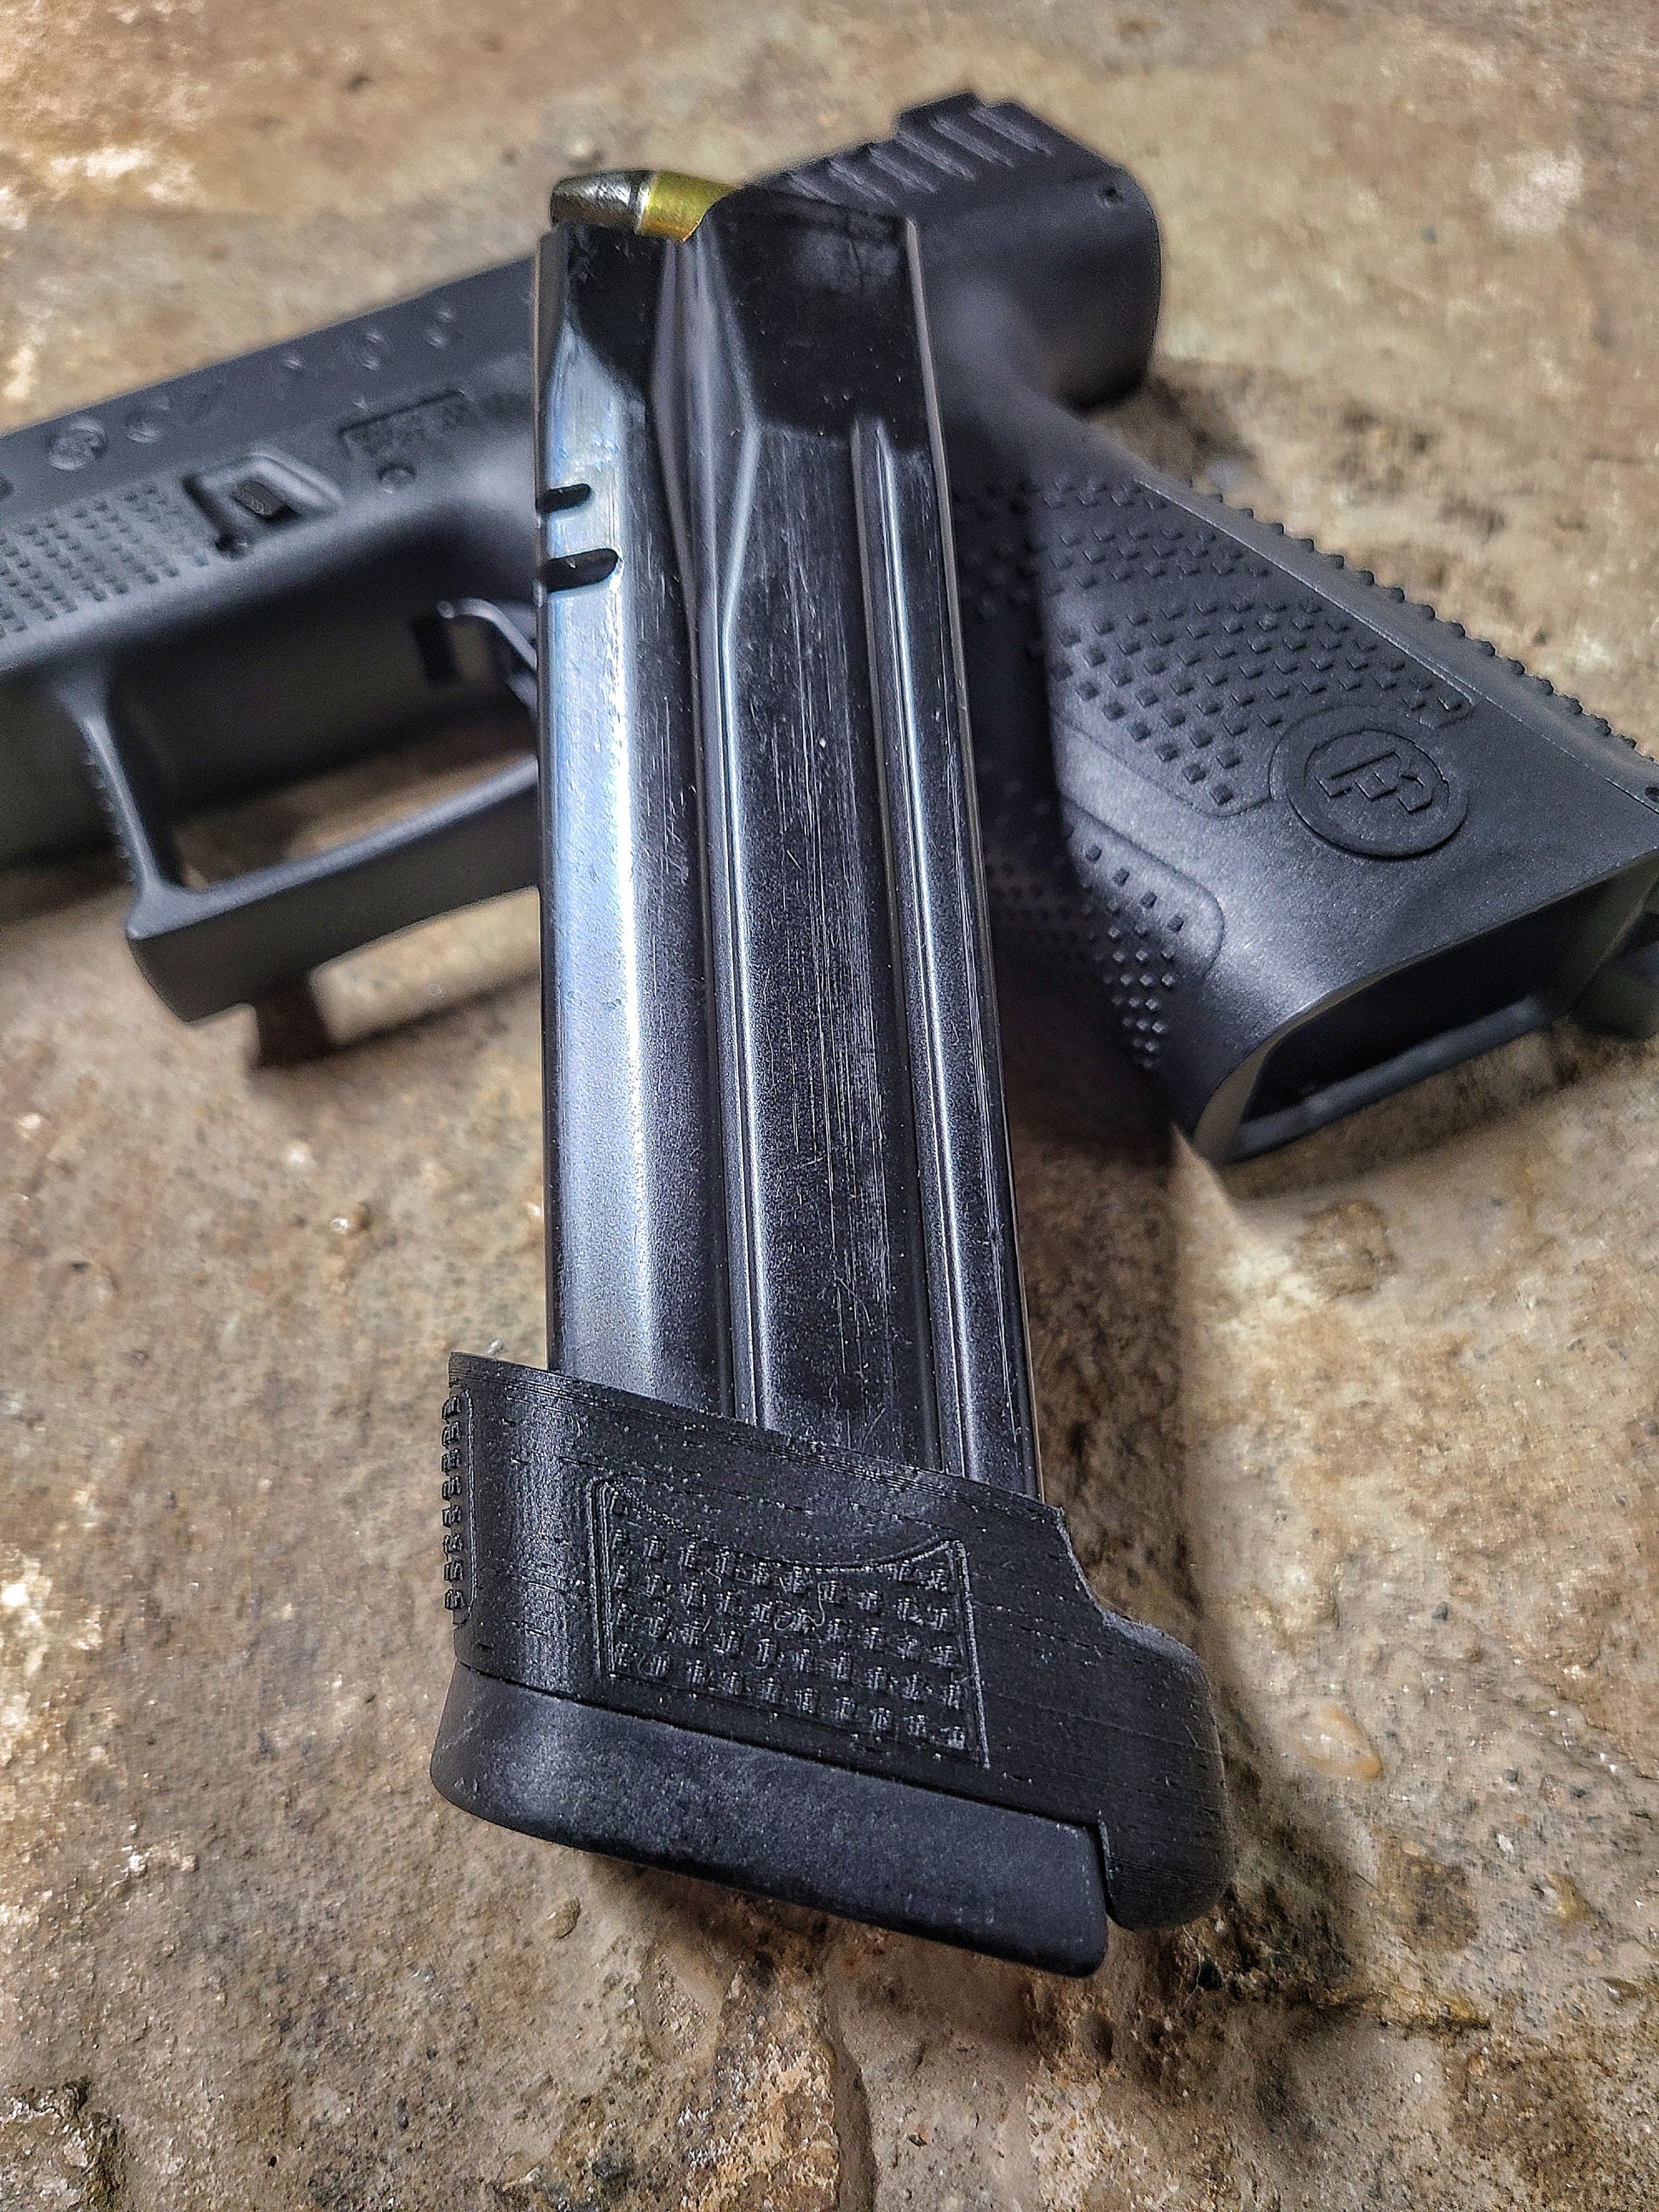 CZ P10c Magazine Sleeve. Used to adapt the CZ P10F 19 round magazines to the compact frame.